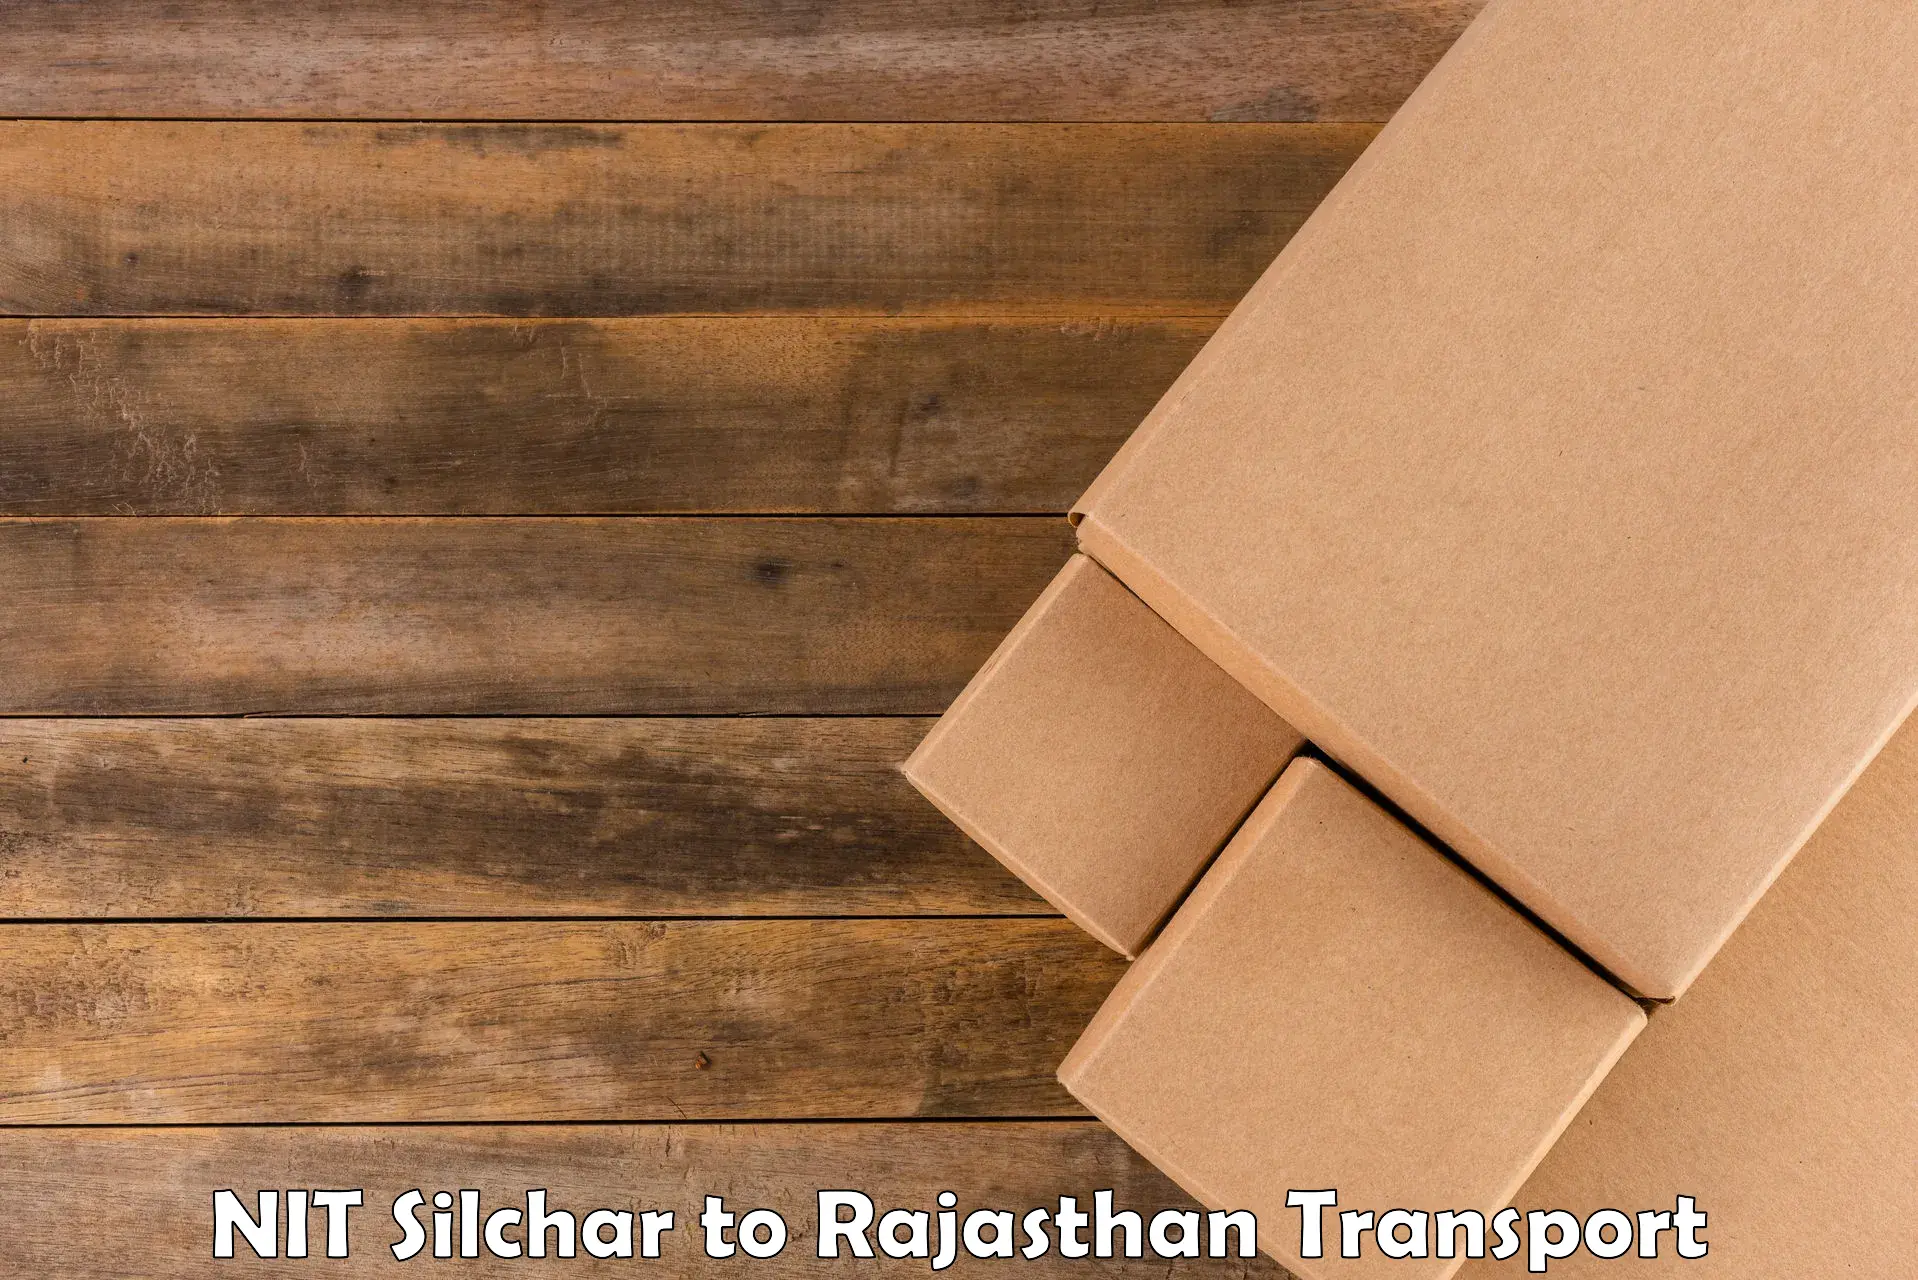 Container transportation services NIT Silchar to Dungarpur